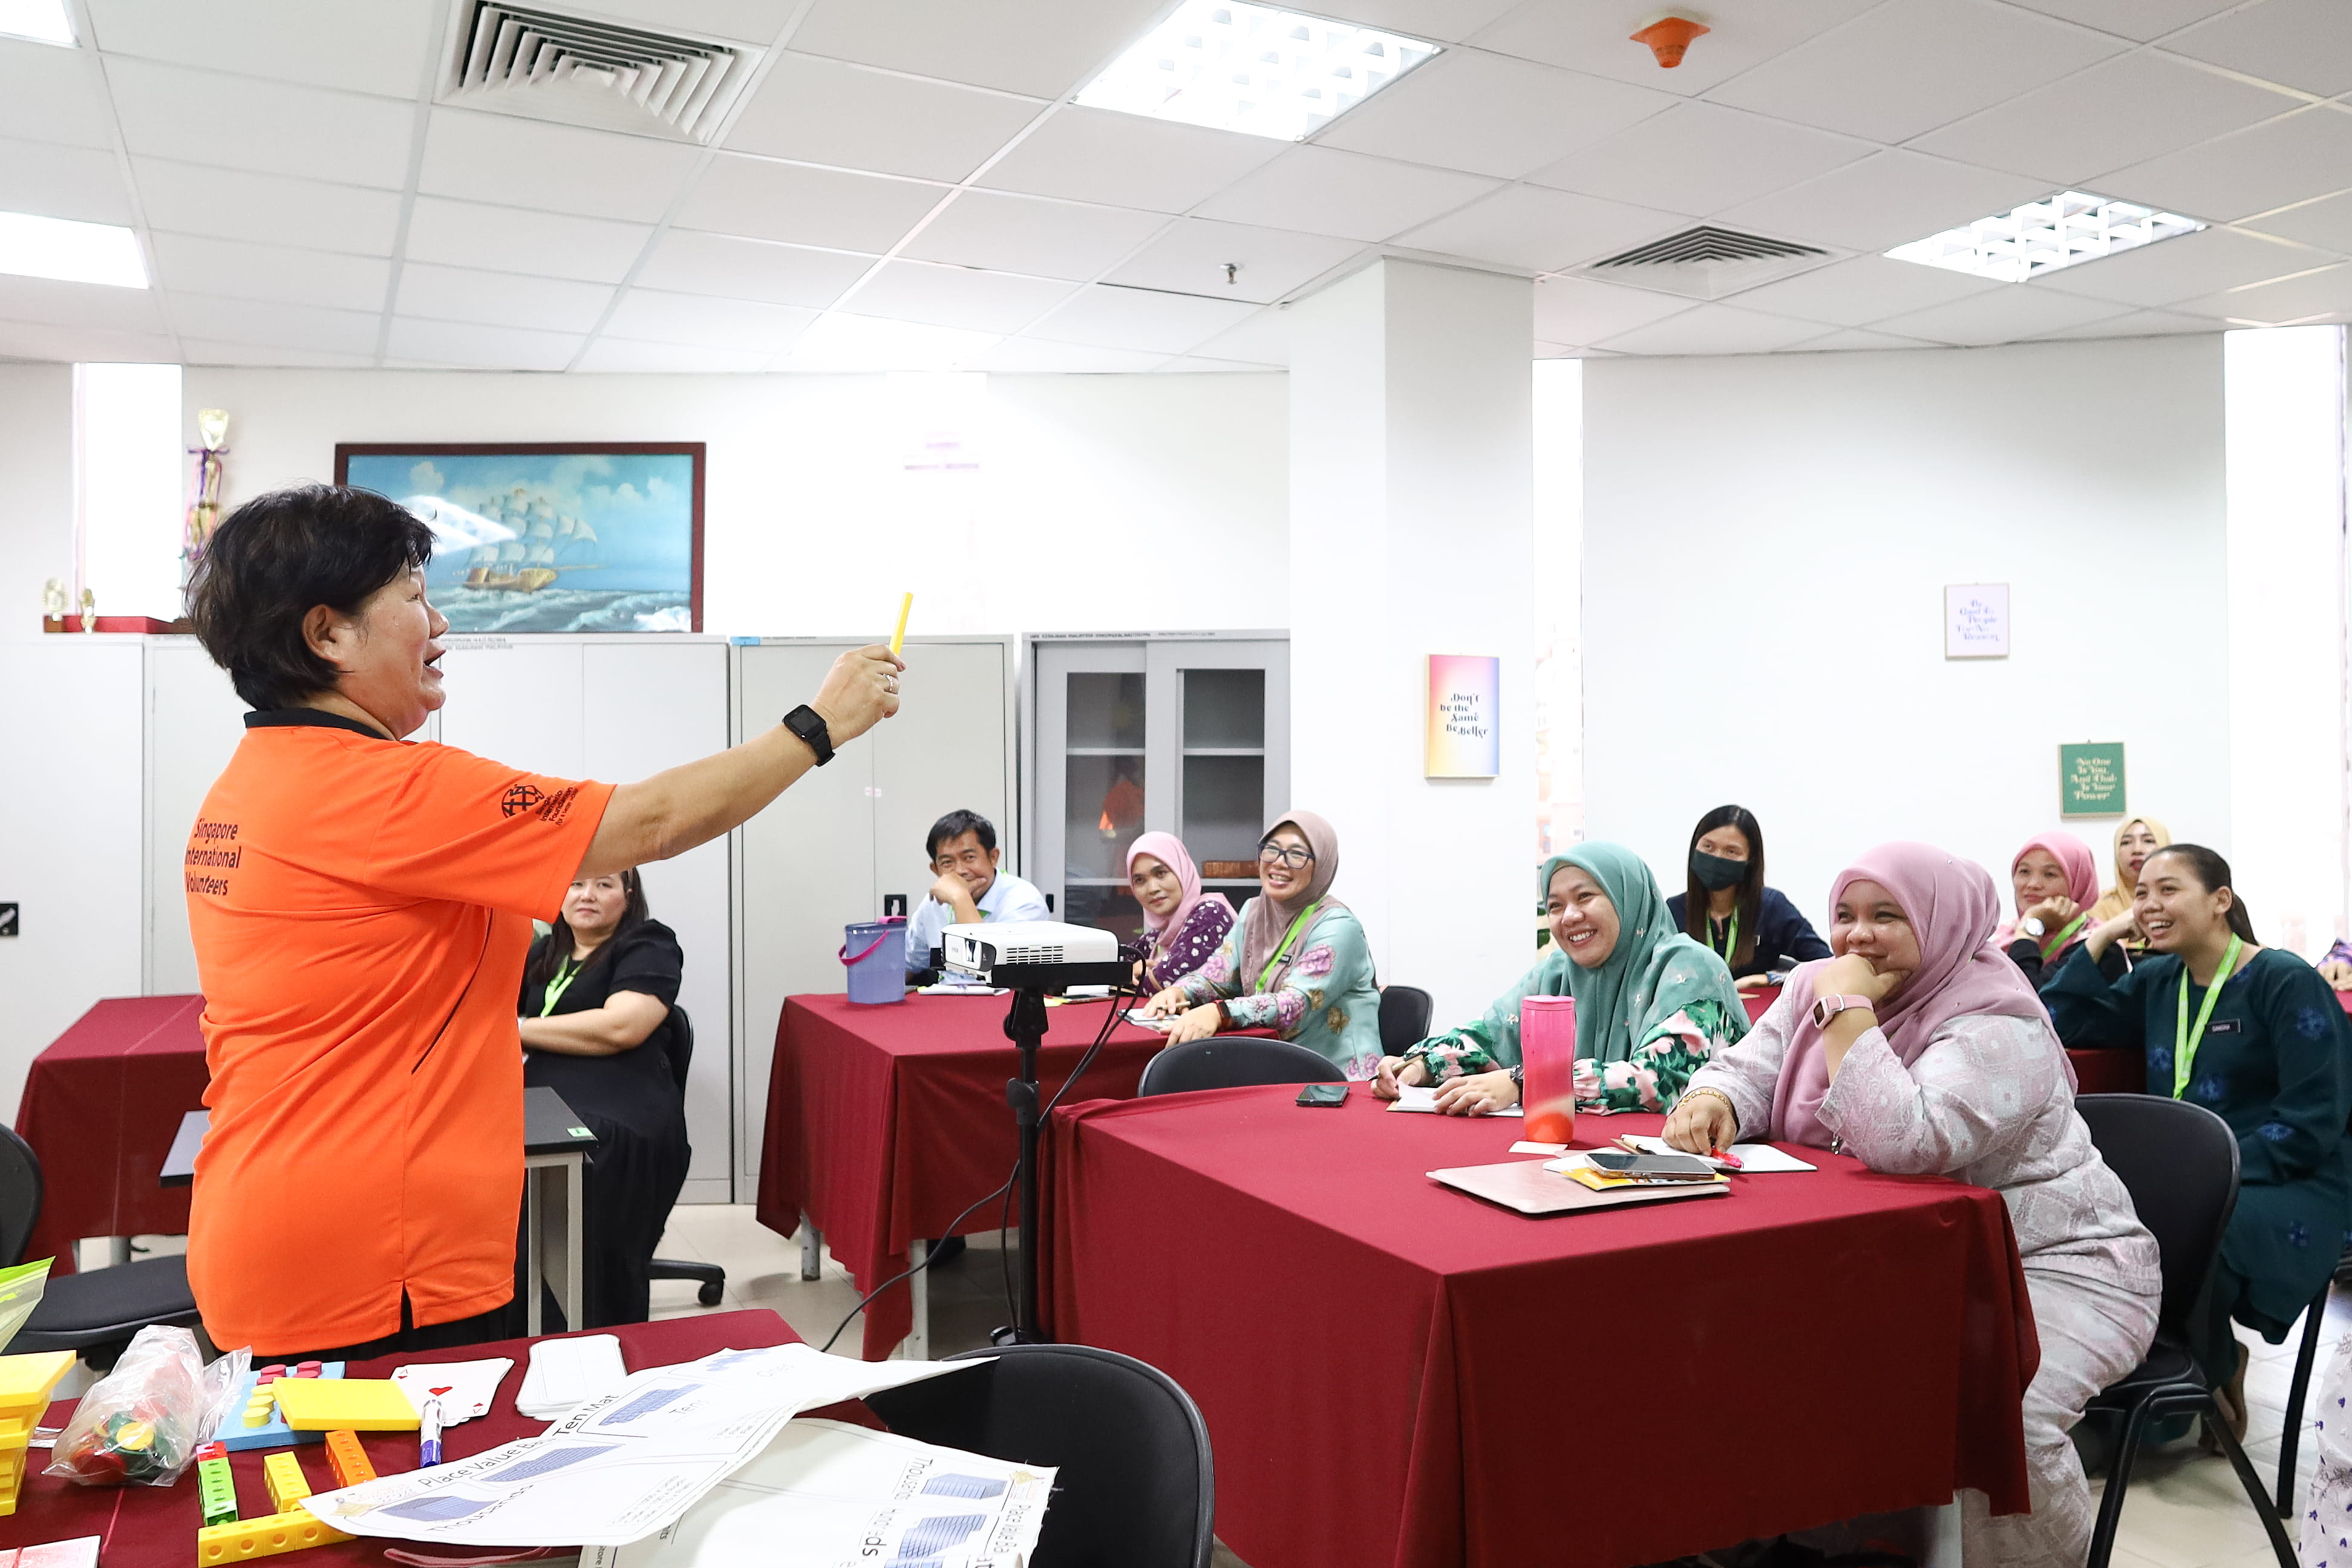 SIV Ms Juliana Donna Loh (in orange) demonstrating the use of Base Ten Blocks, an educational tool that helps students to visualize numbers, at the first Maths PLUS workshop.